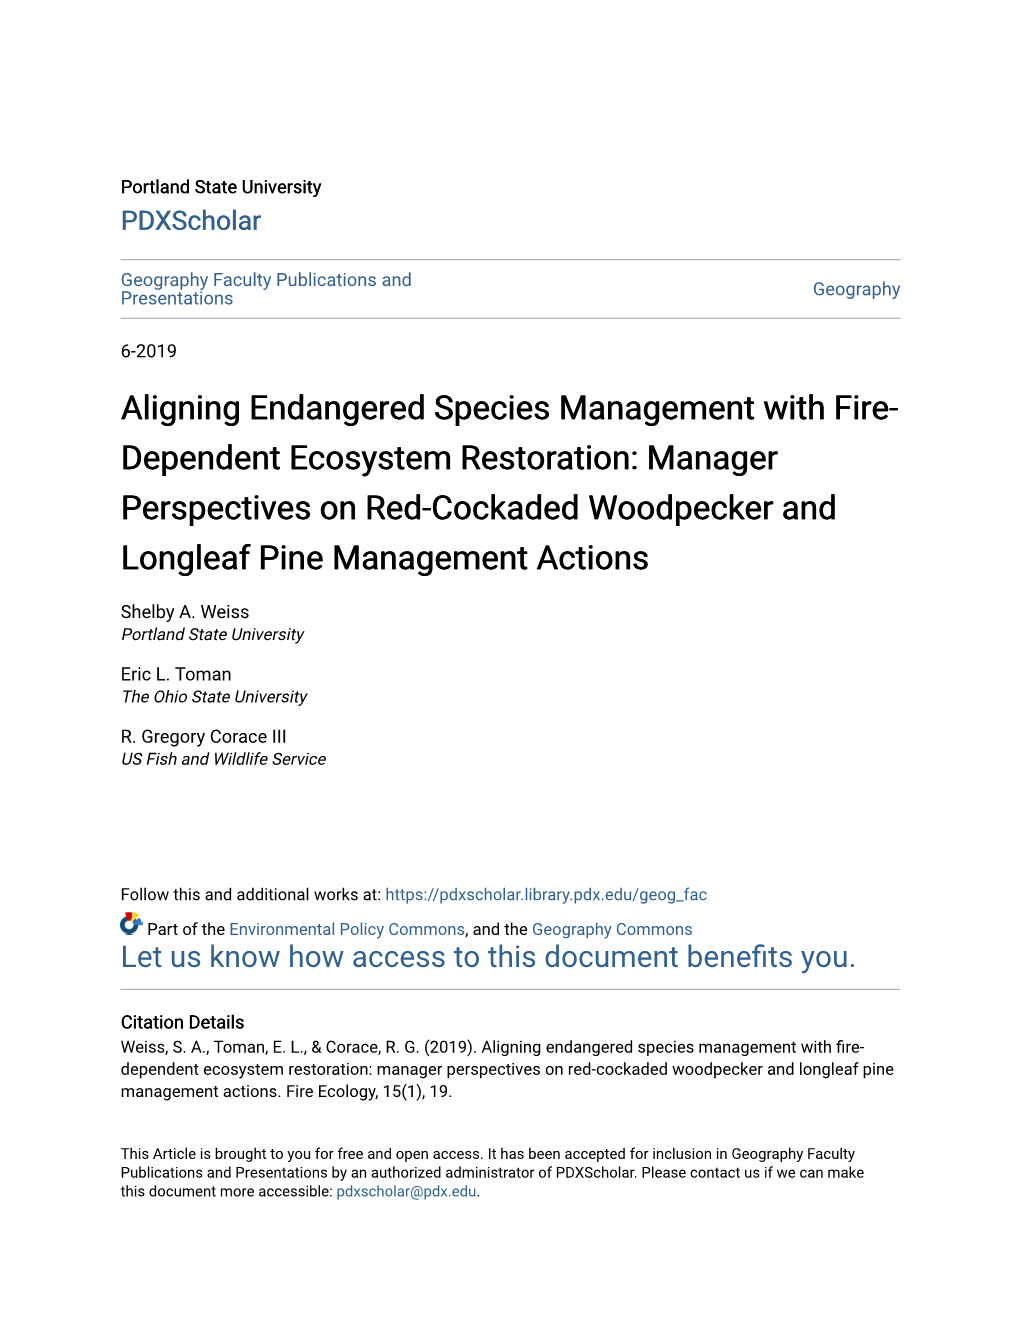 Aligning Endangered Species Management With